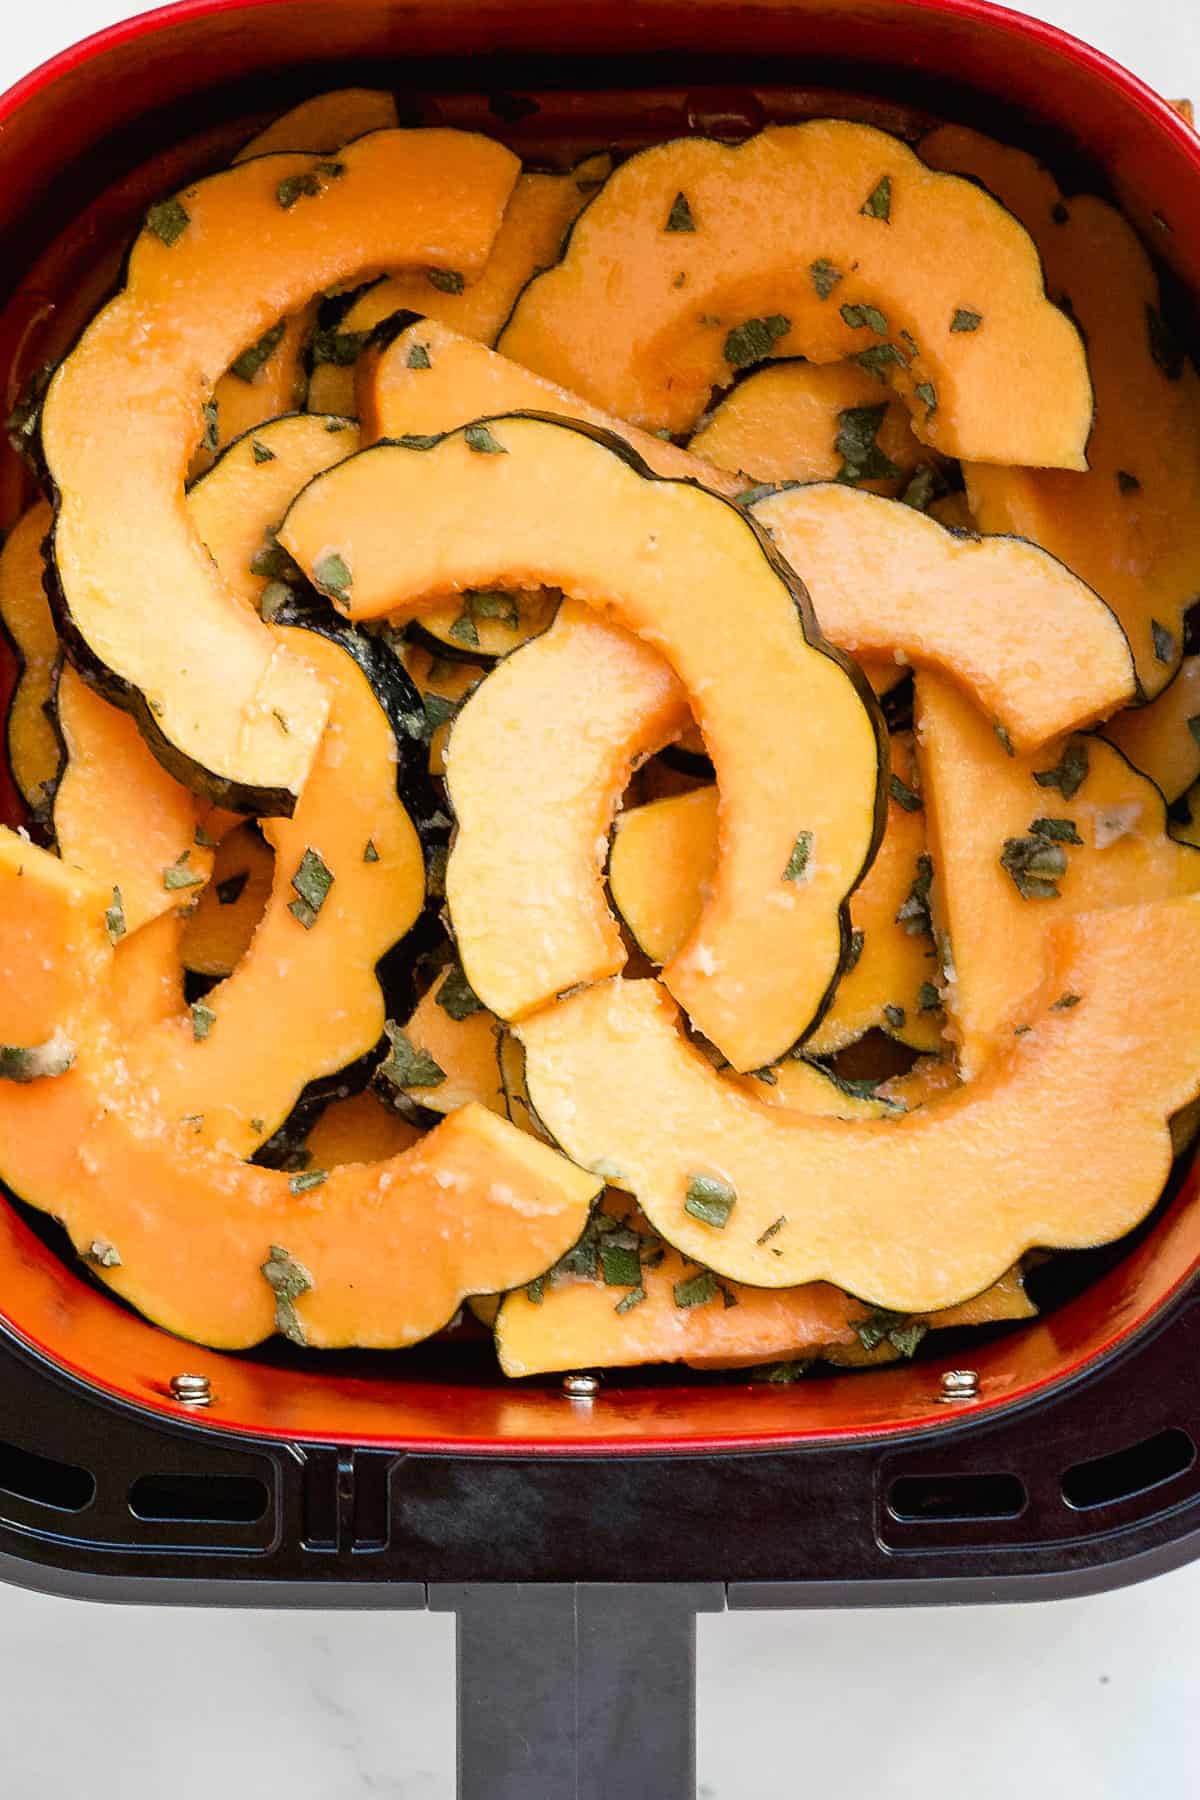 Squash slices in the air fryer basket